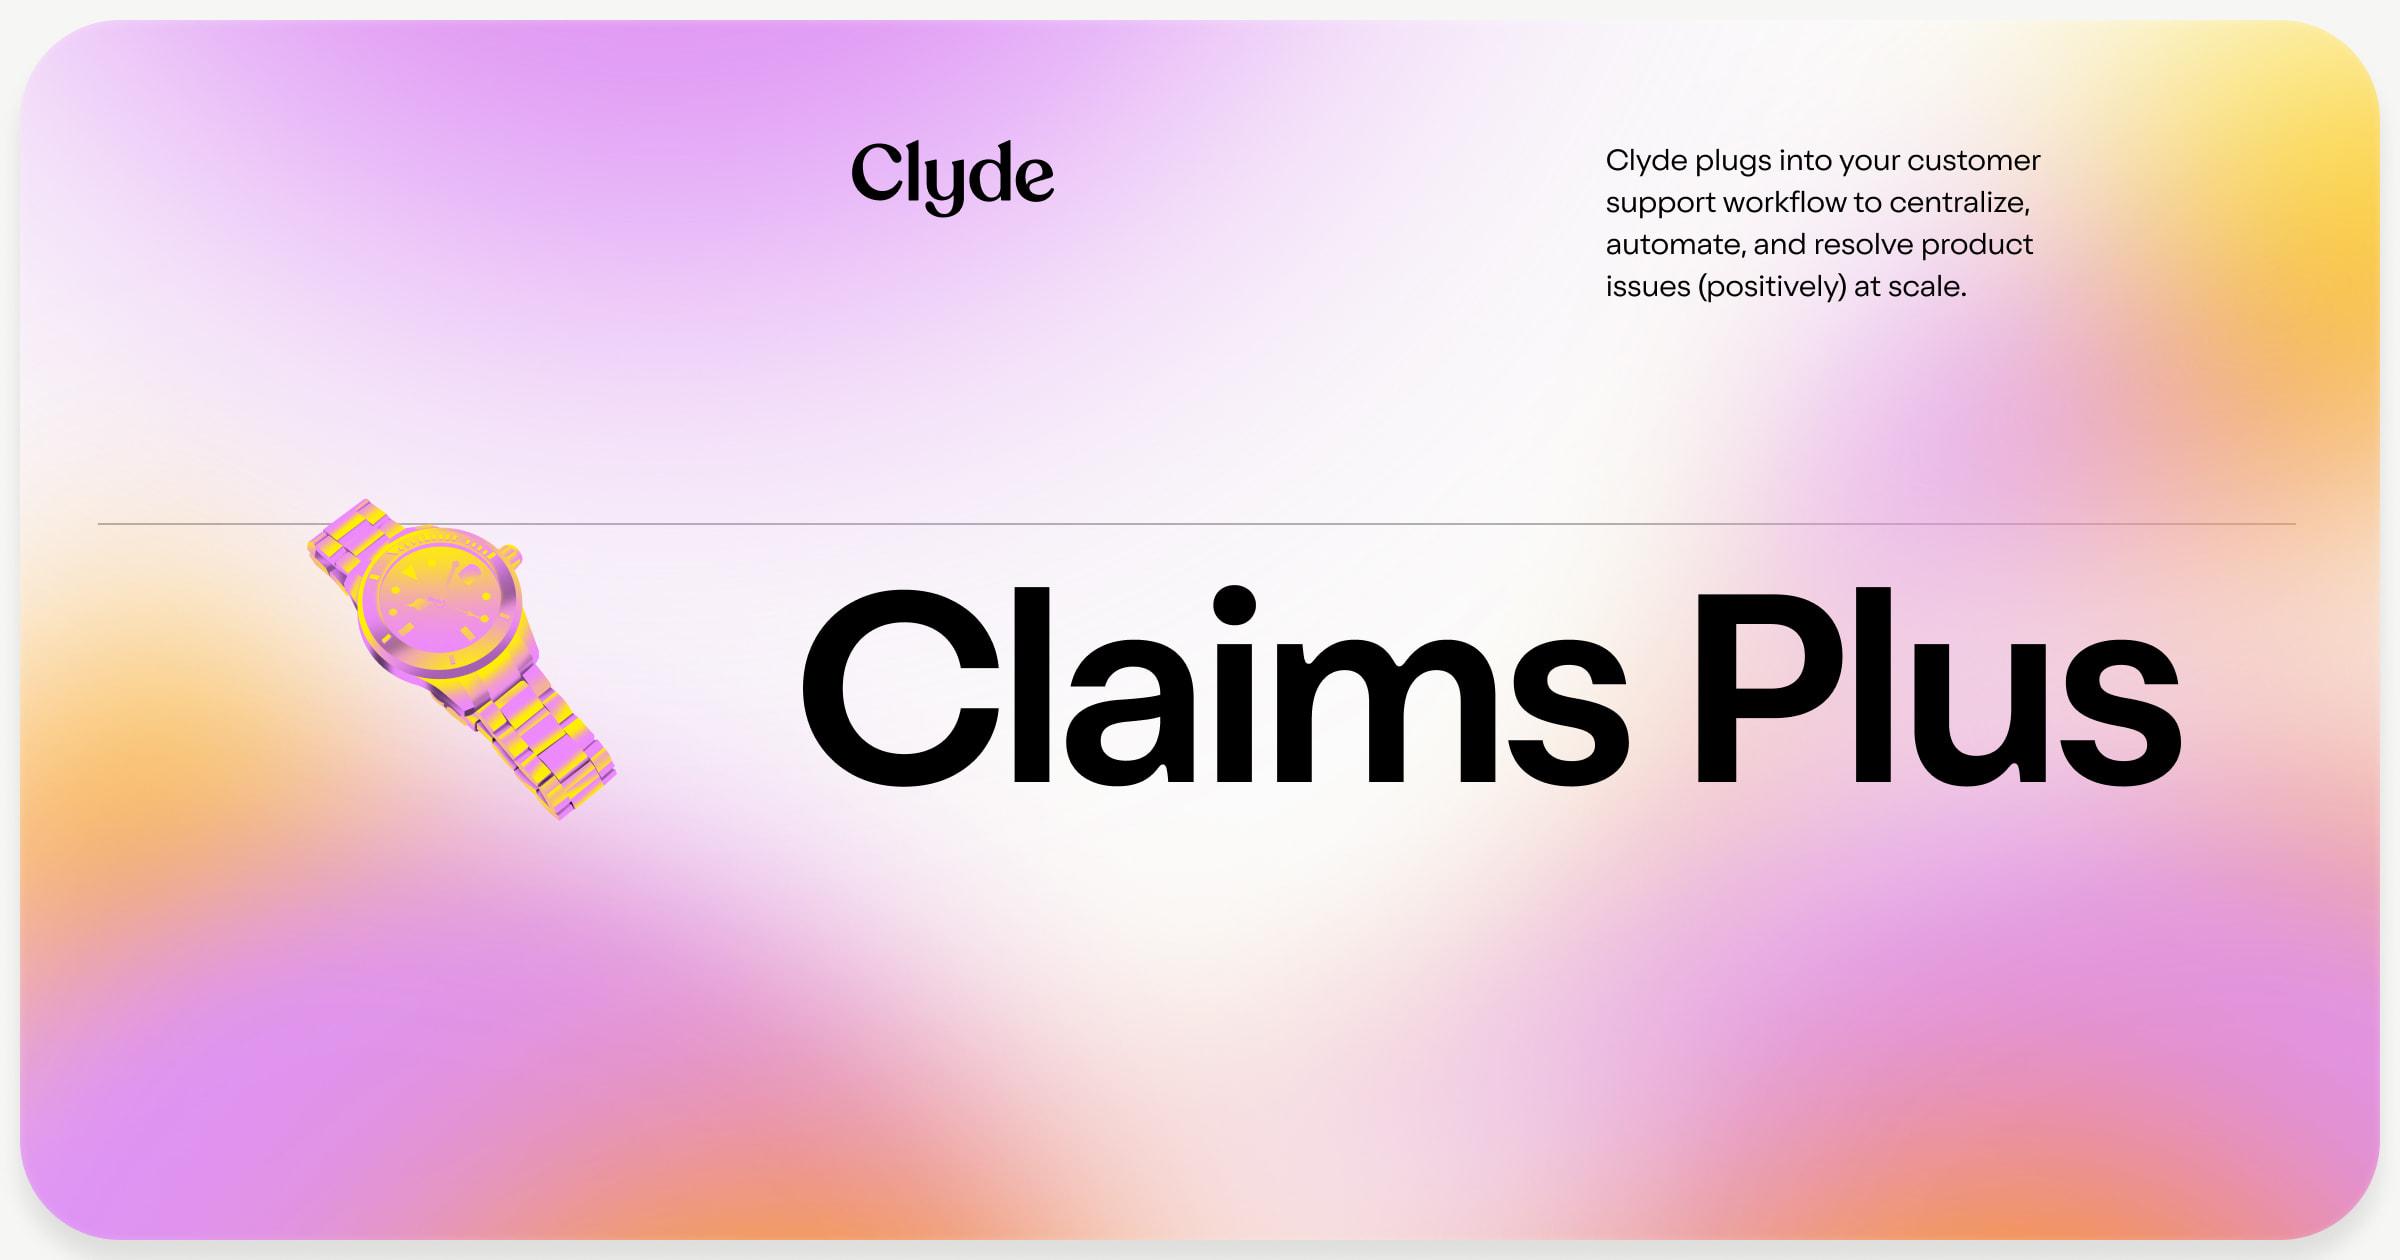 Product: Customer issue support resolution | Clyde